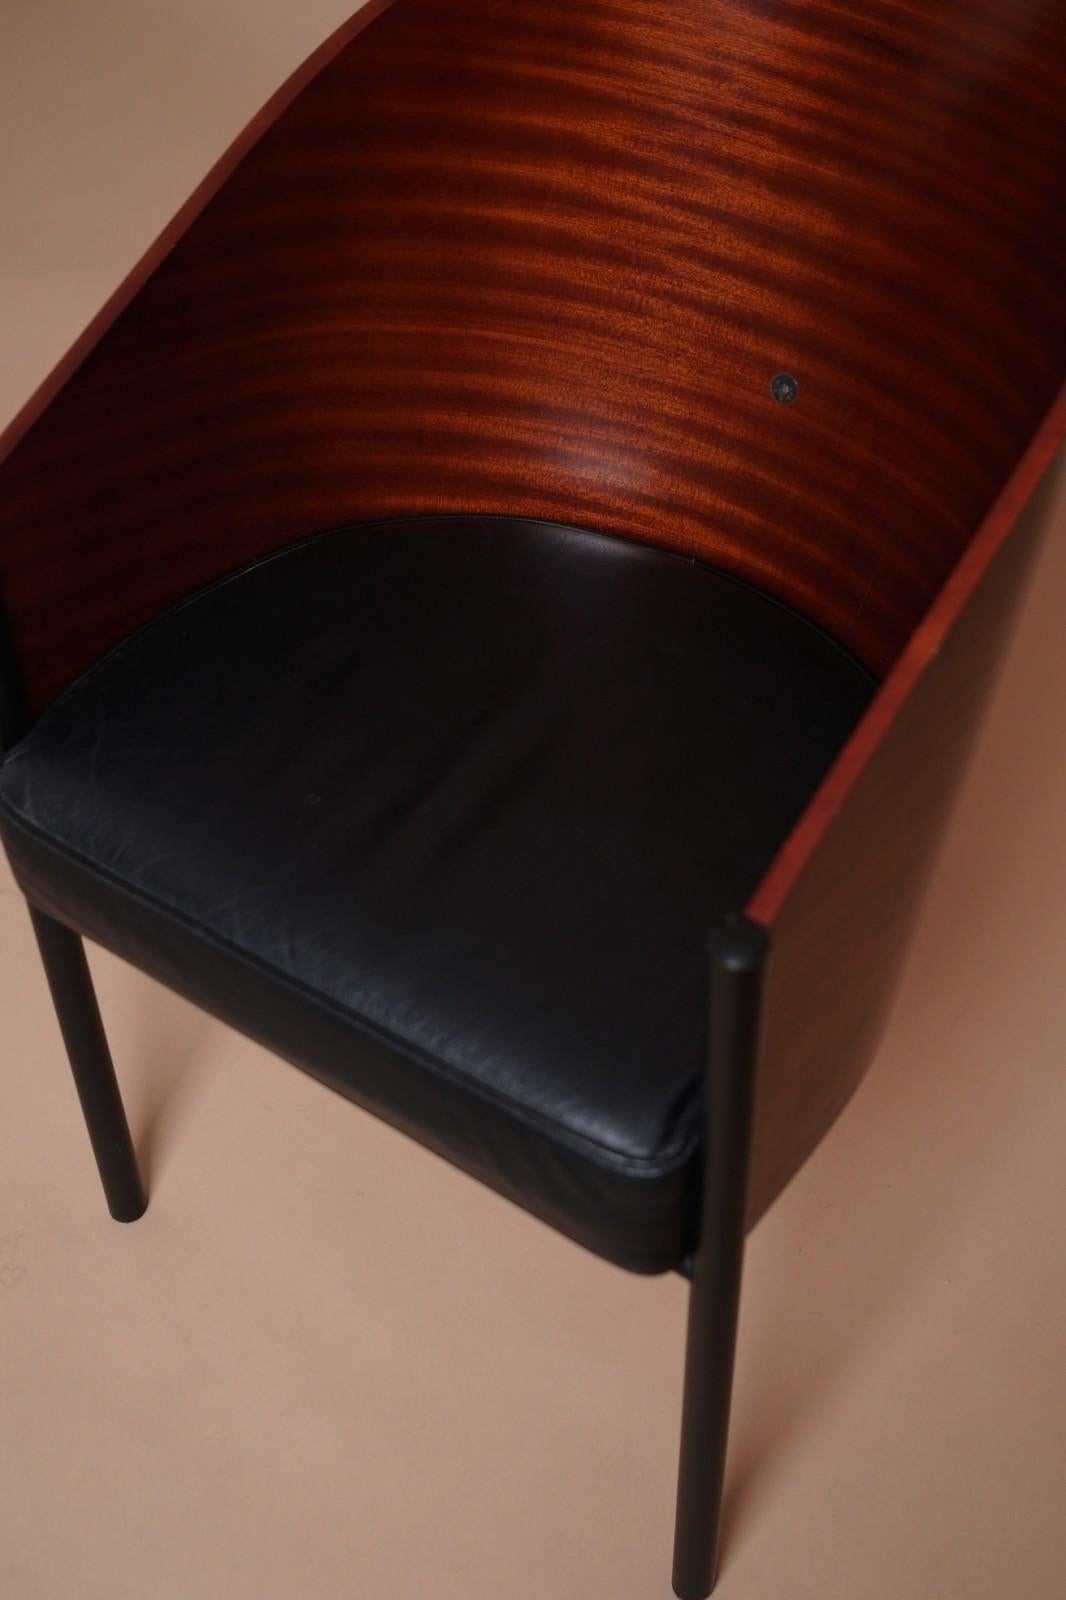 Late 20th Century Costes Chair By Philippe Starck for Driade 1980s For Sale